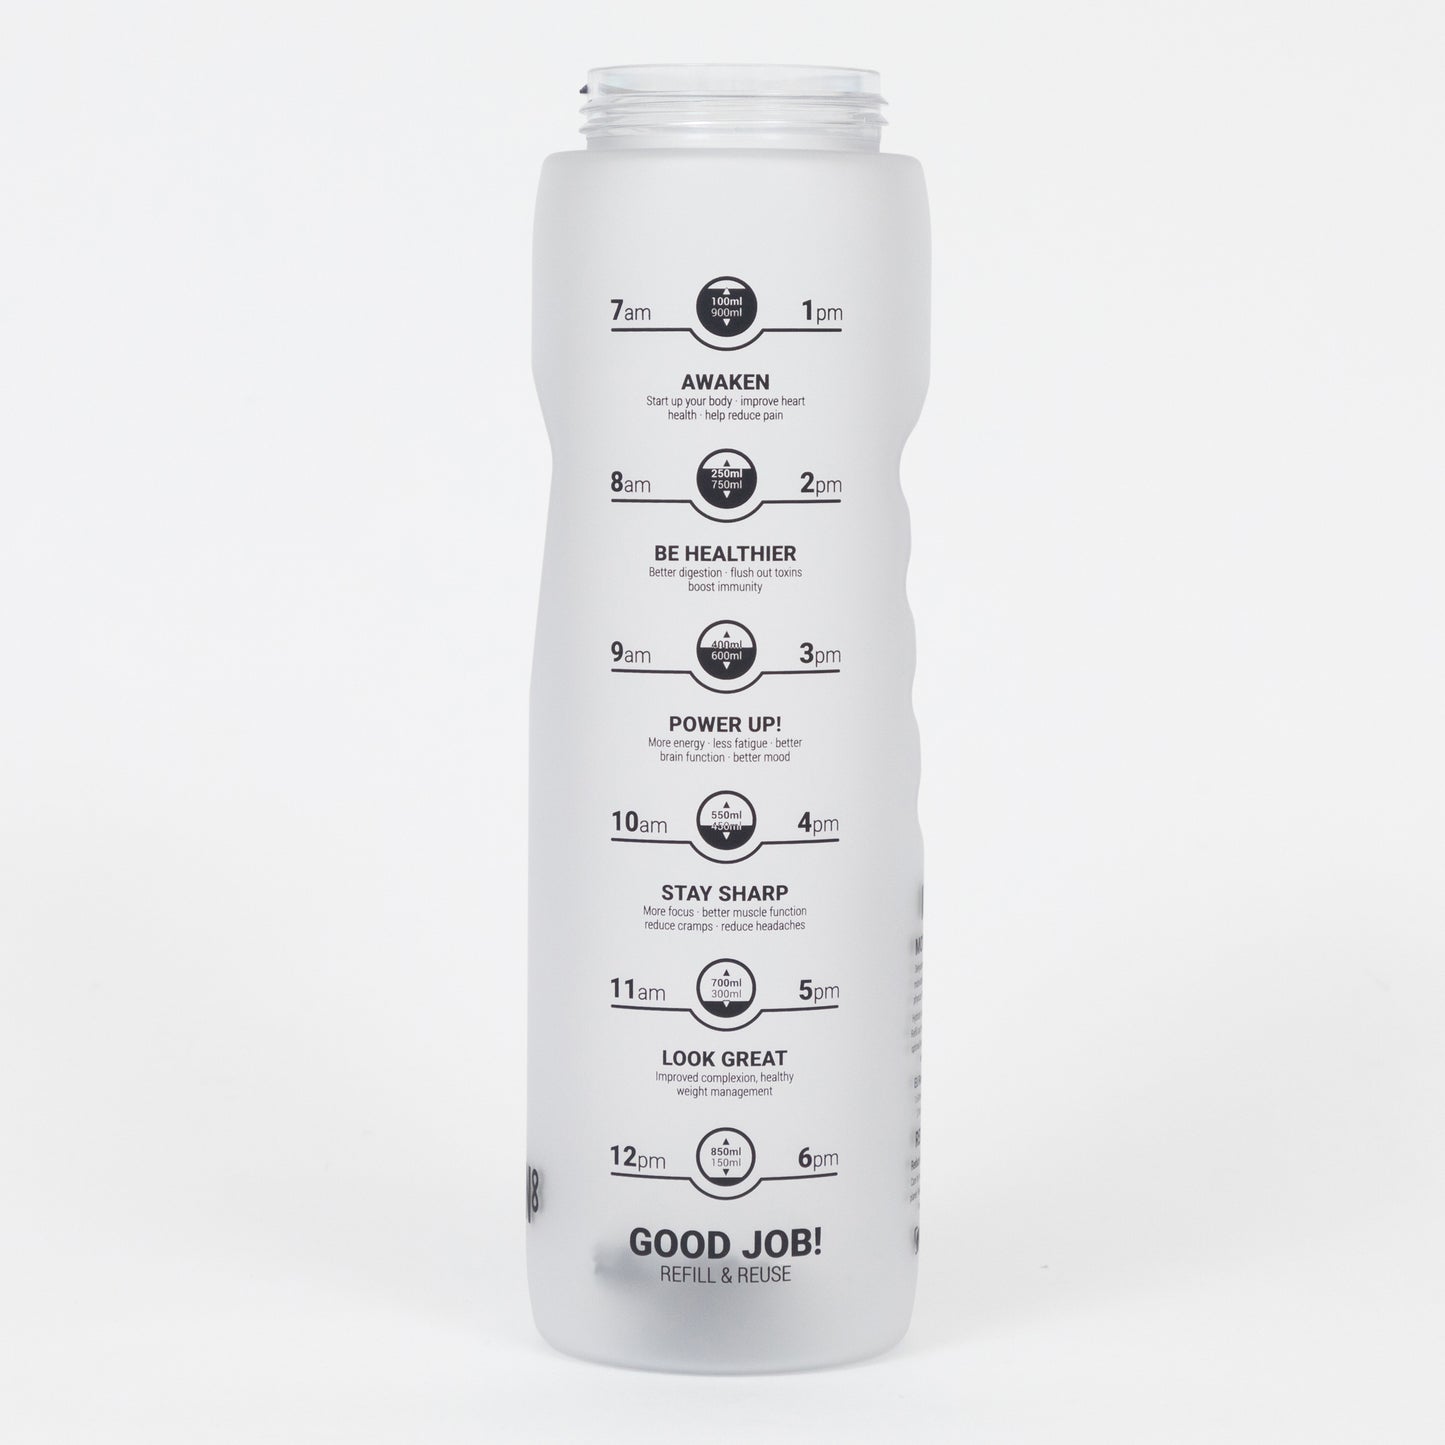 Ion8 Leak Proof 1 Litre Sports Water Bottle (with times to drink) in WHITE